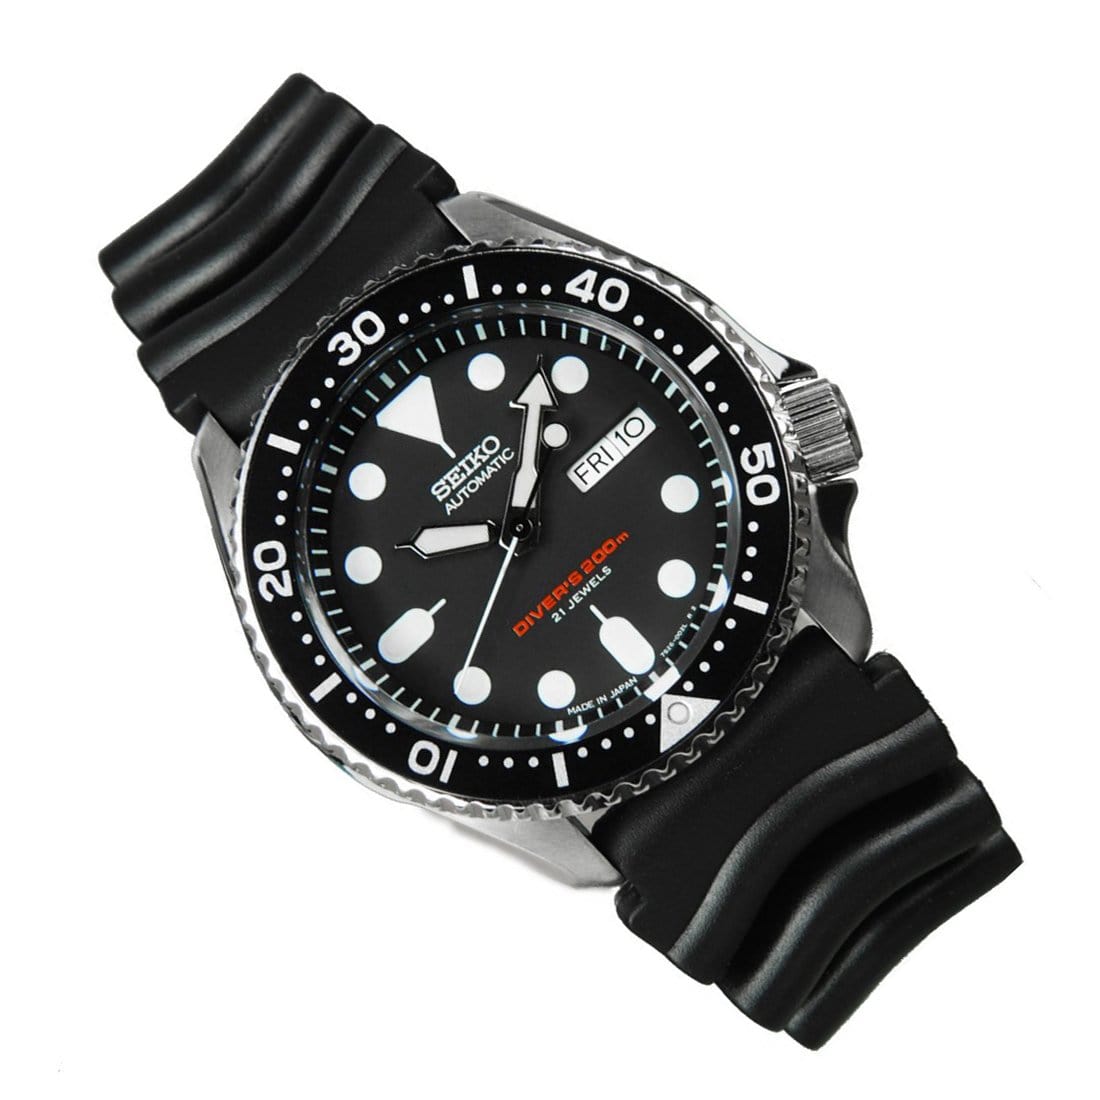 Seiko Automatic Watch SKX007J1 SKX007 with Additional Band